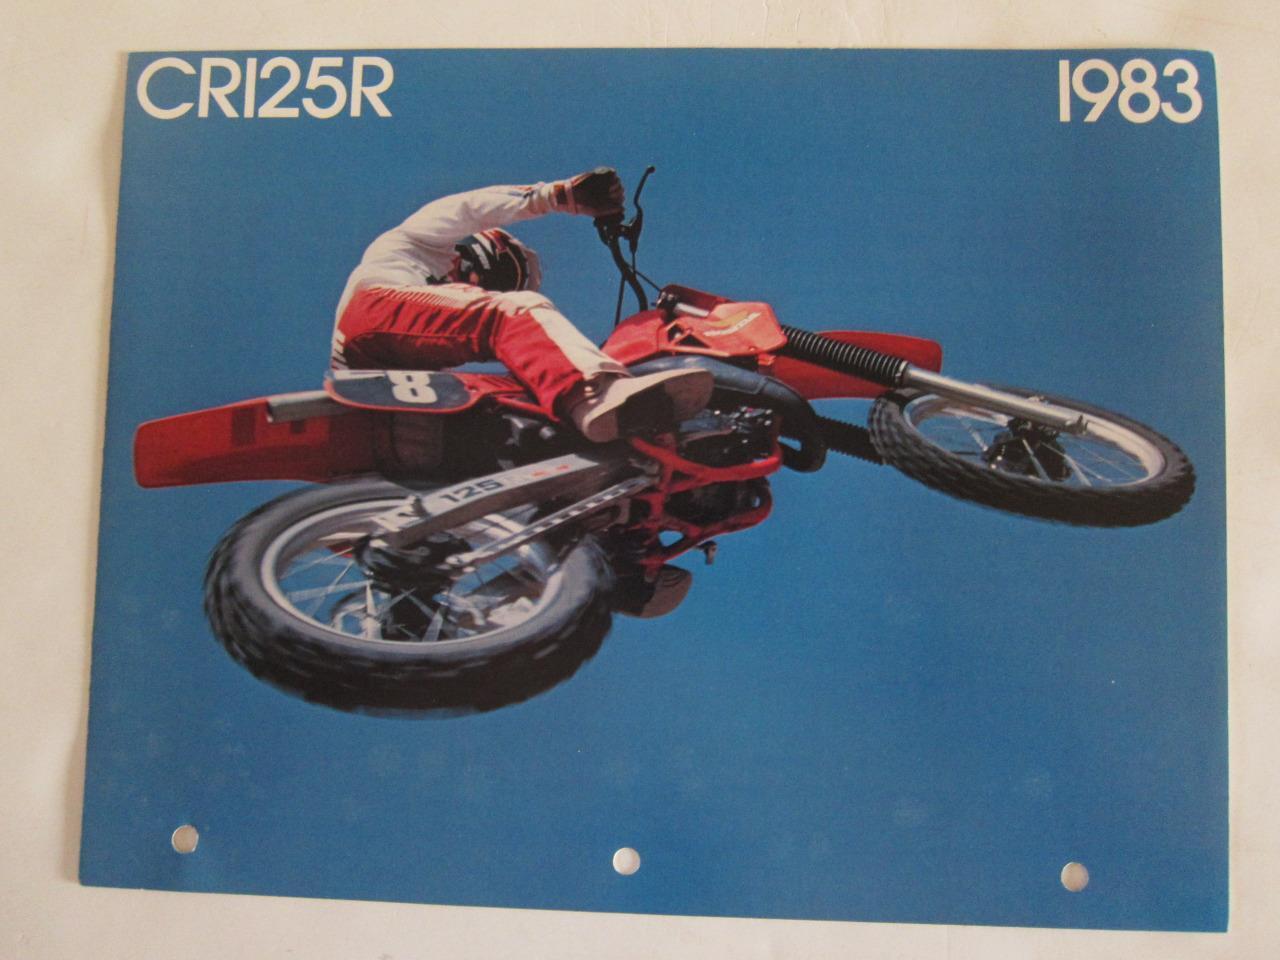 HONDA motorcycle brochure CR 125 R Uncirculated high quality pictures 1983